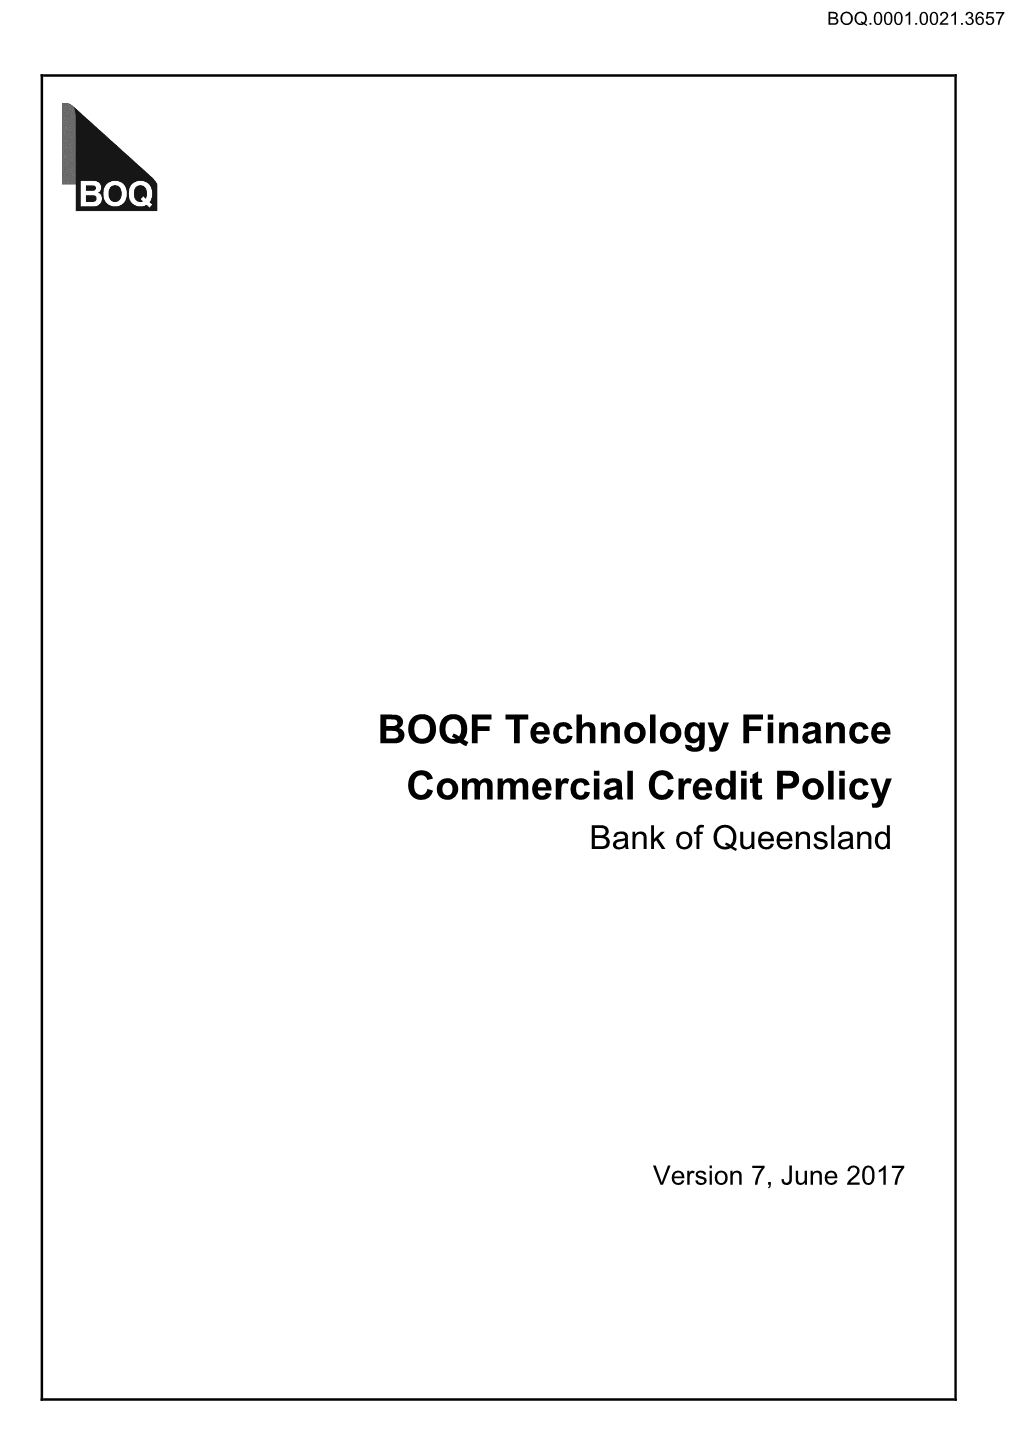 BOQF Technology Finance Commercial Credit Policy Bank of Queensland